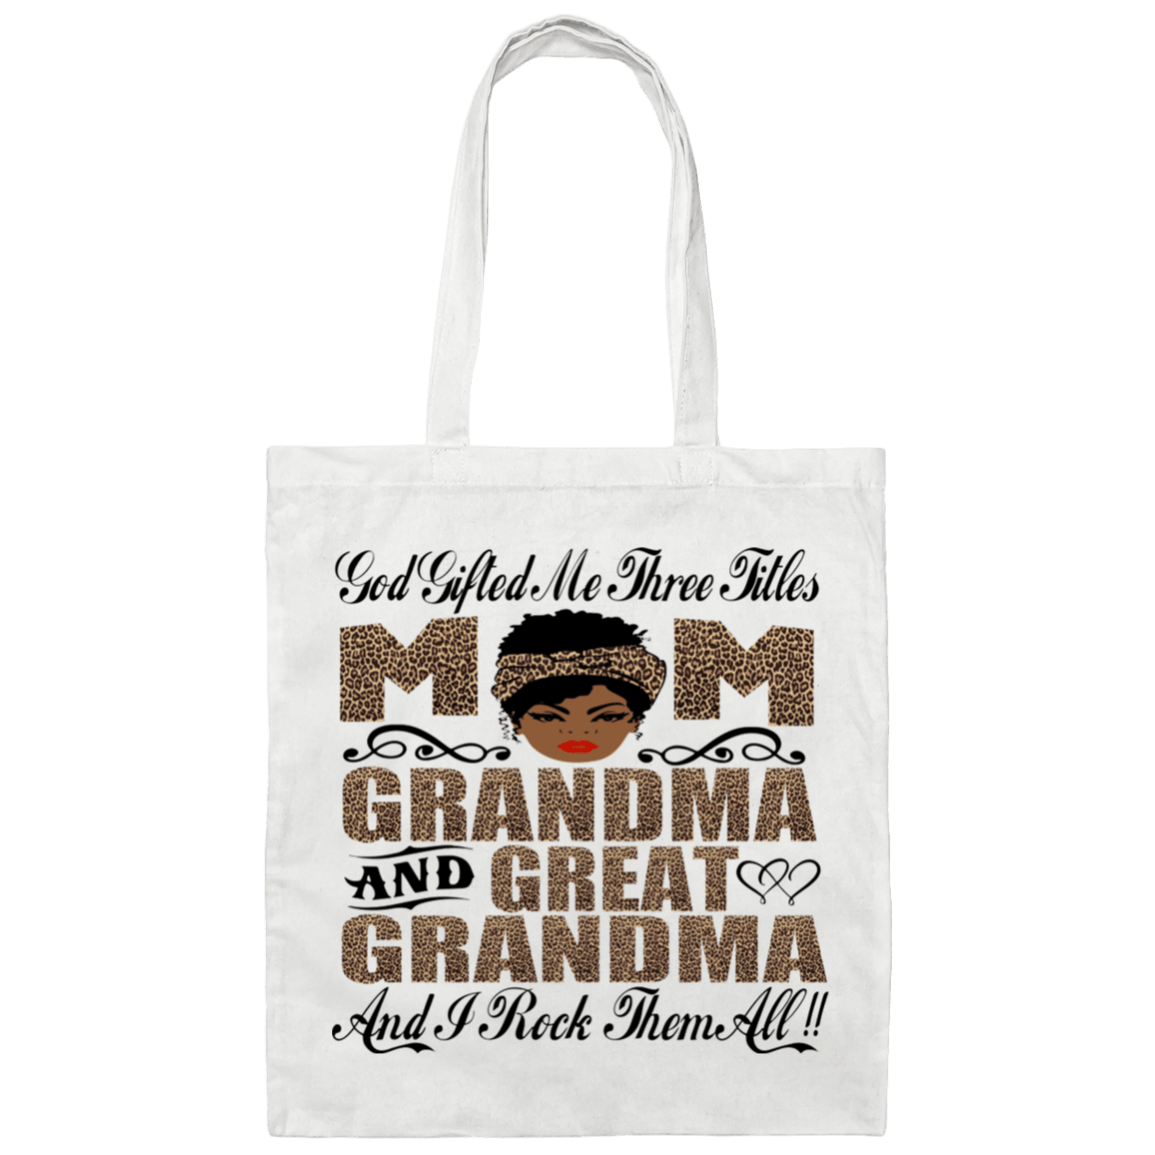 God gifted me three names.... Canvas Tote Bag